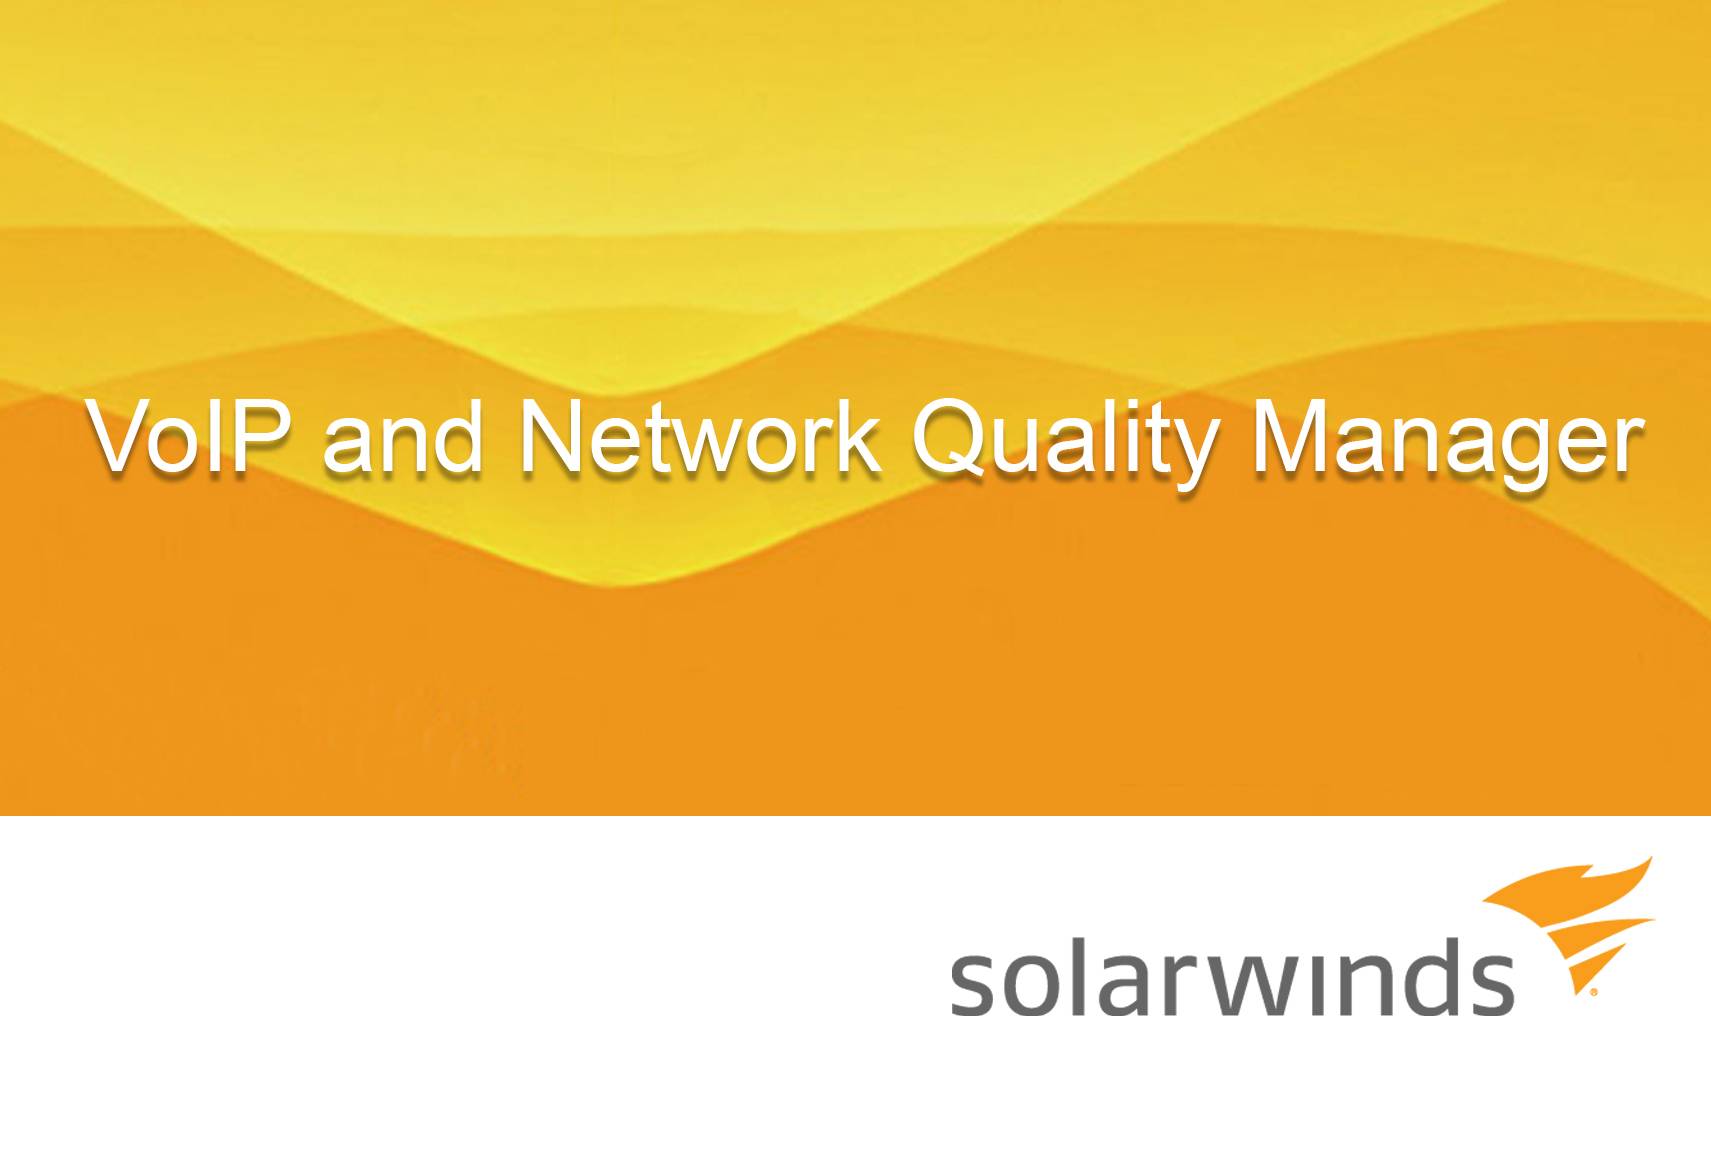 solarwinds SolarWinds VoIP and Network Quality Manager IP SLA 25, IP Phone 1500 (up to 25 IP SLA source devices, 1500 IP phones) - License with 1st-Year Maintenance